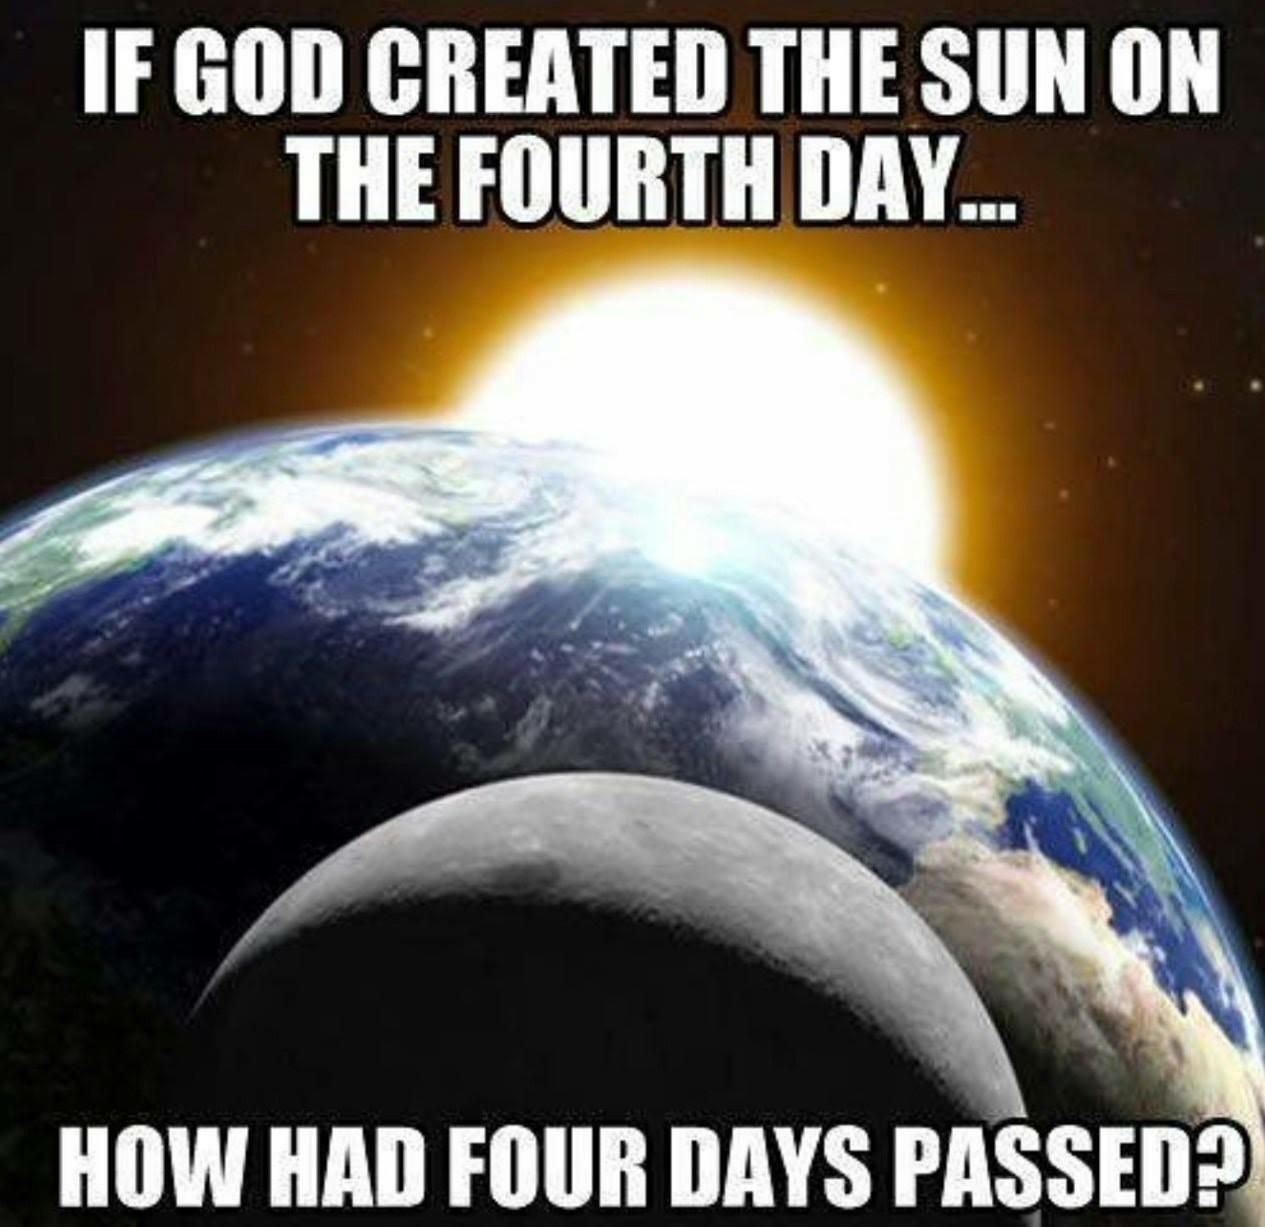 If God created the Sun in the fourth day...